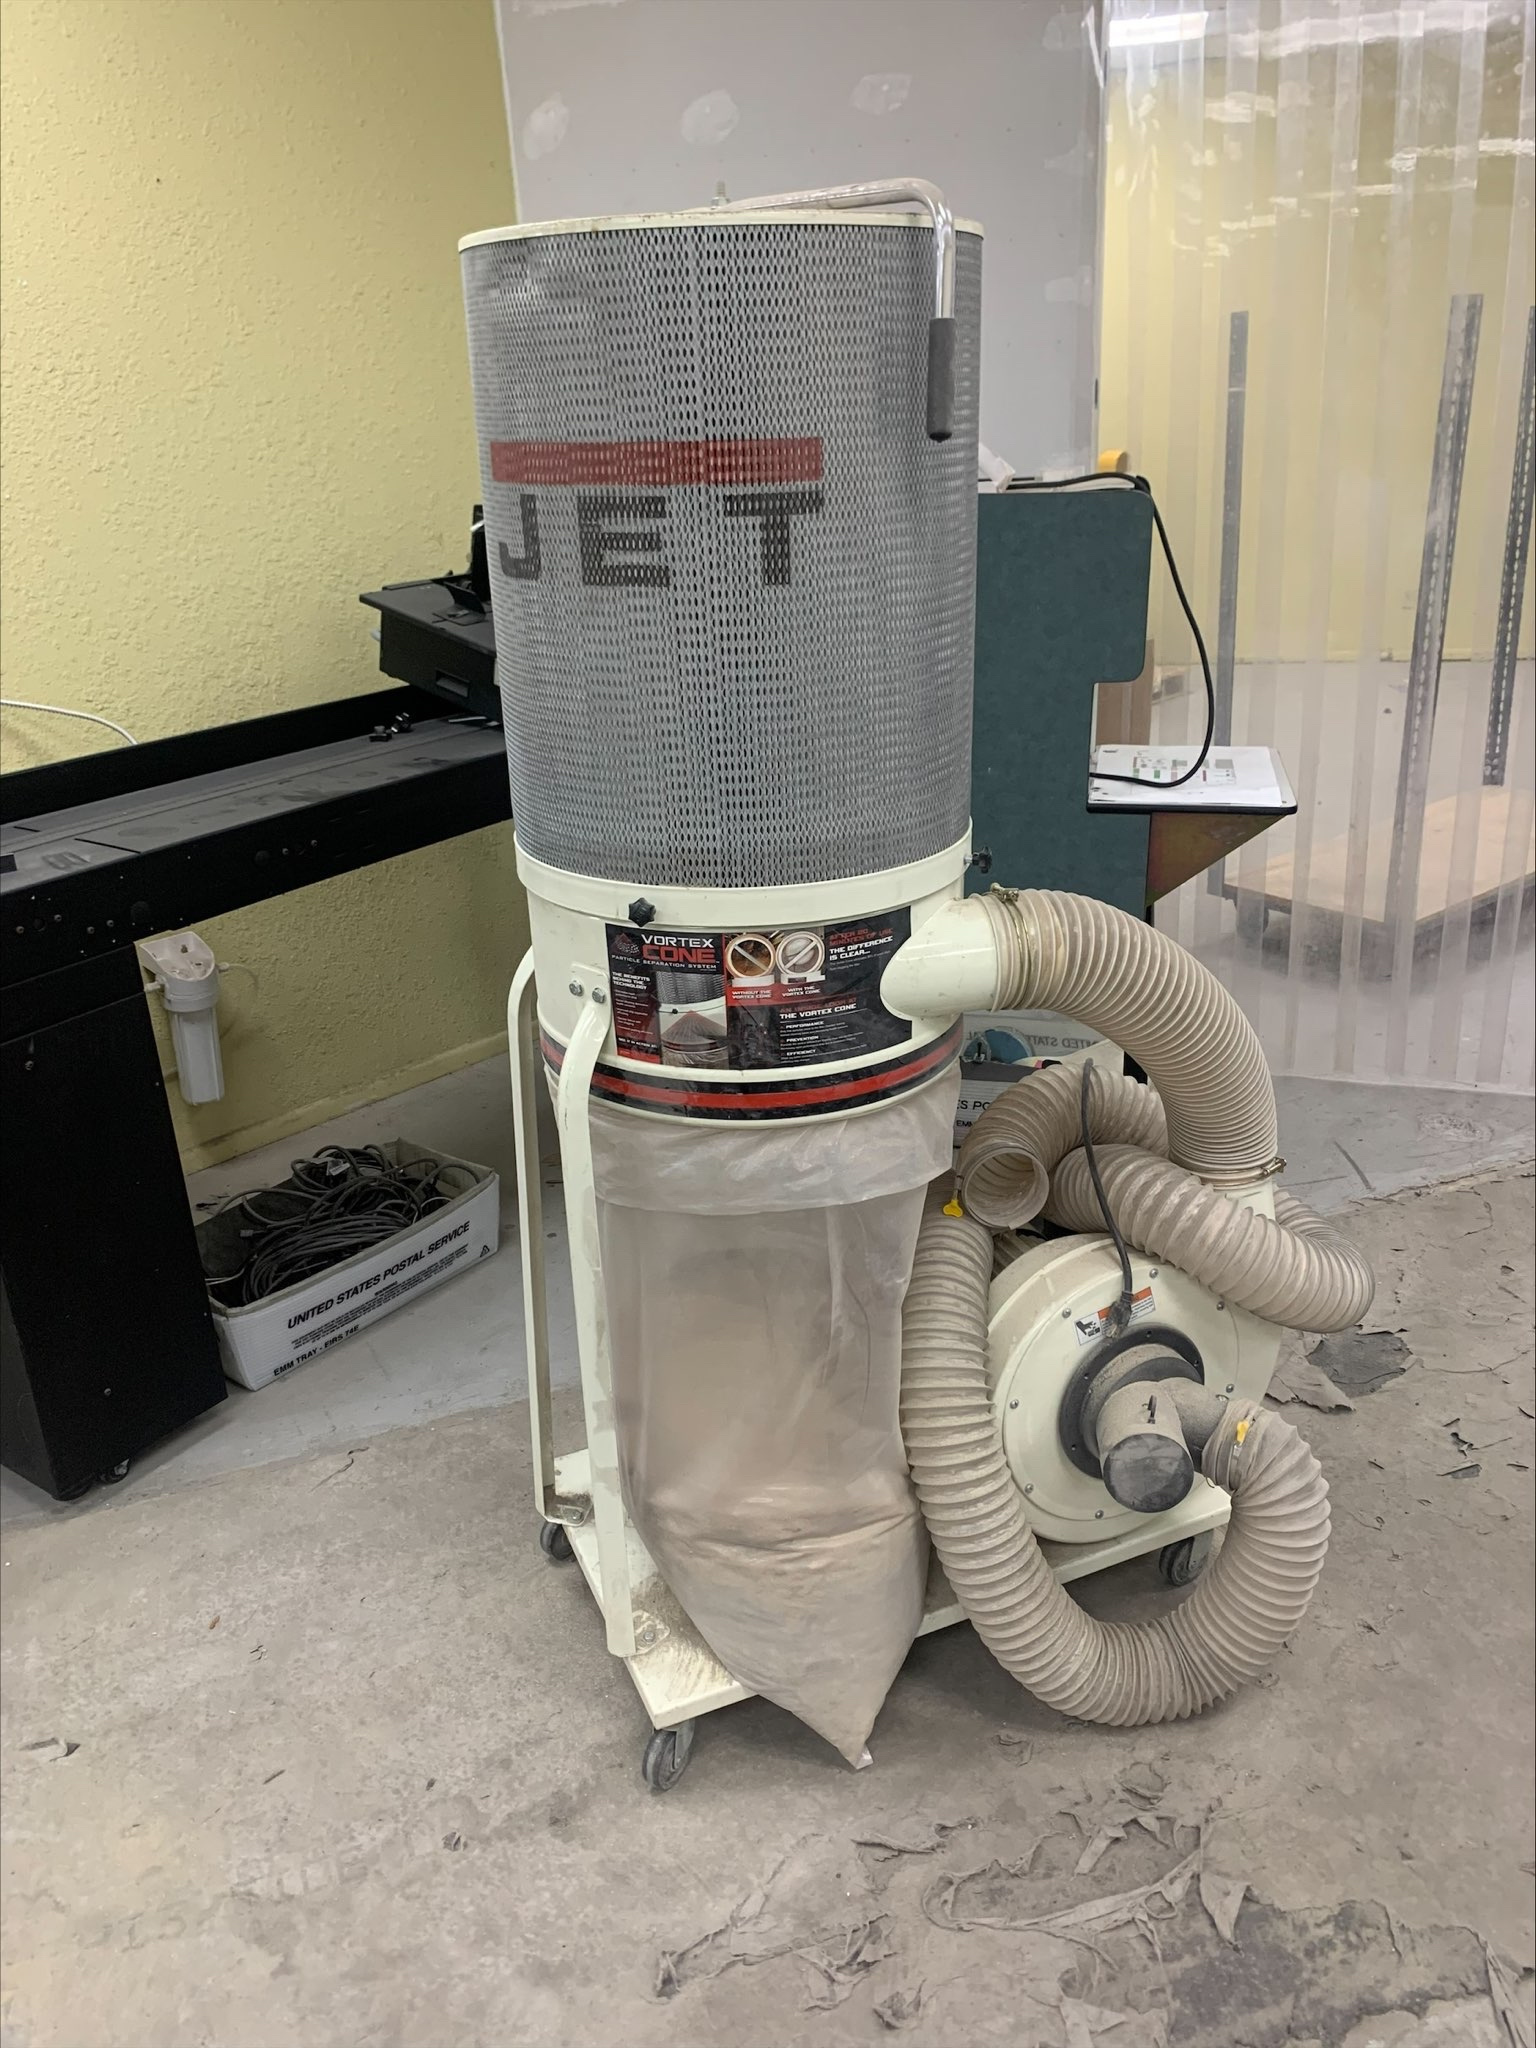 Equipment Lot: Smipack Auto Heat Tunnel, Lift Tables, Dust Collectors & Printers (Used) Item # UE-081022B (Florida)